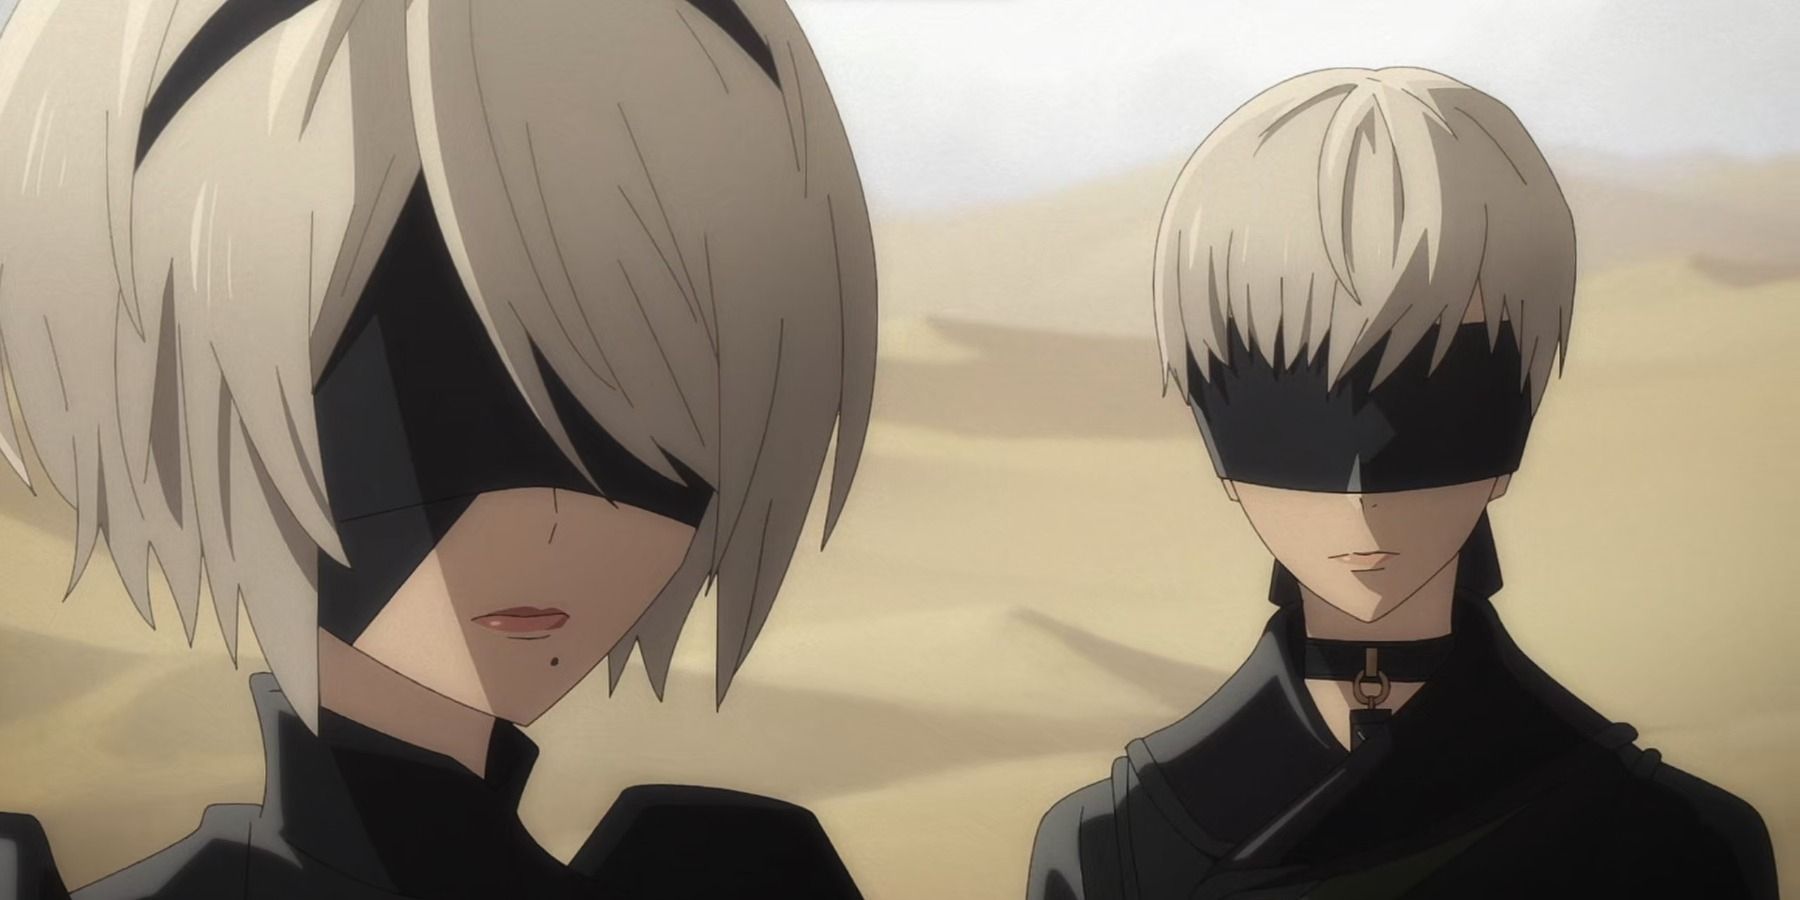 2B and 9S in desert Nier: Automata anime episode 3